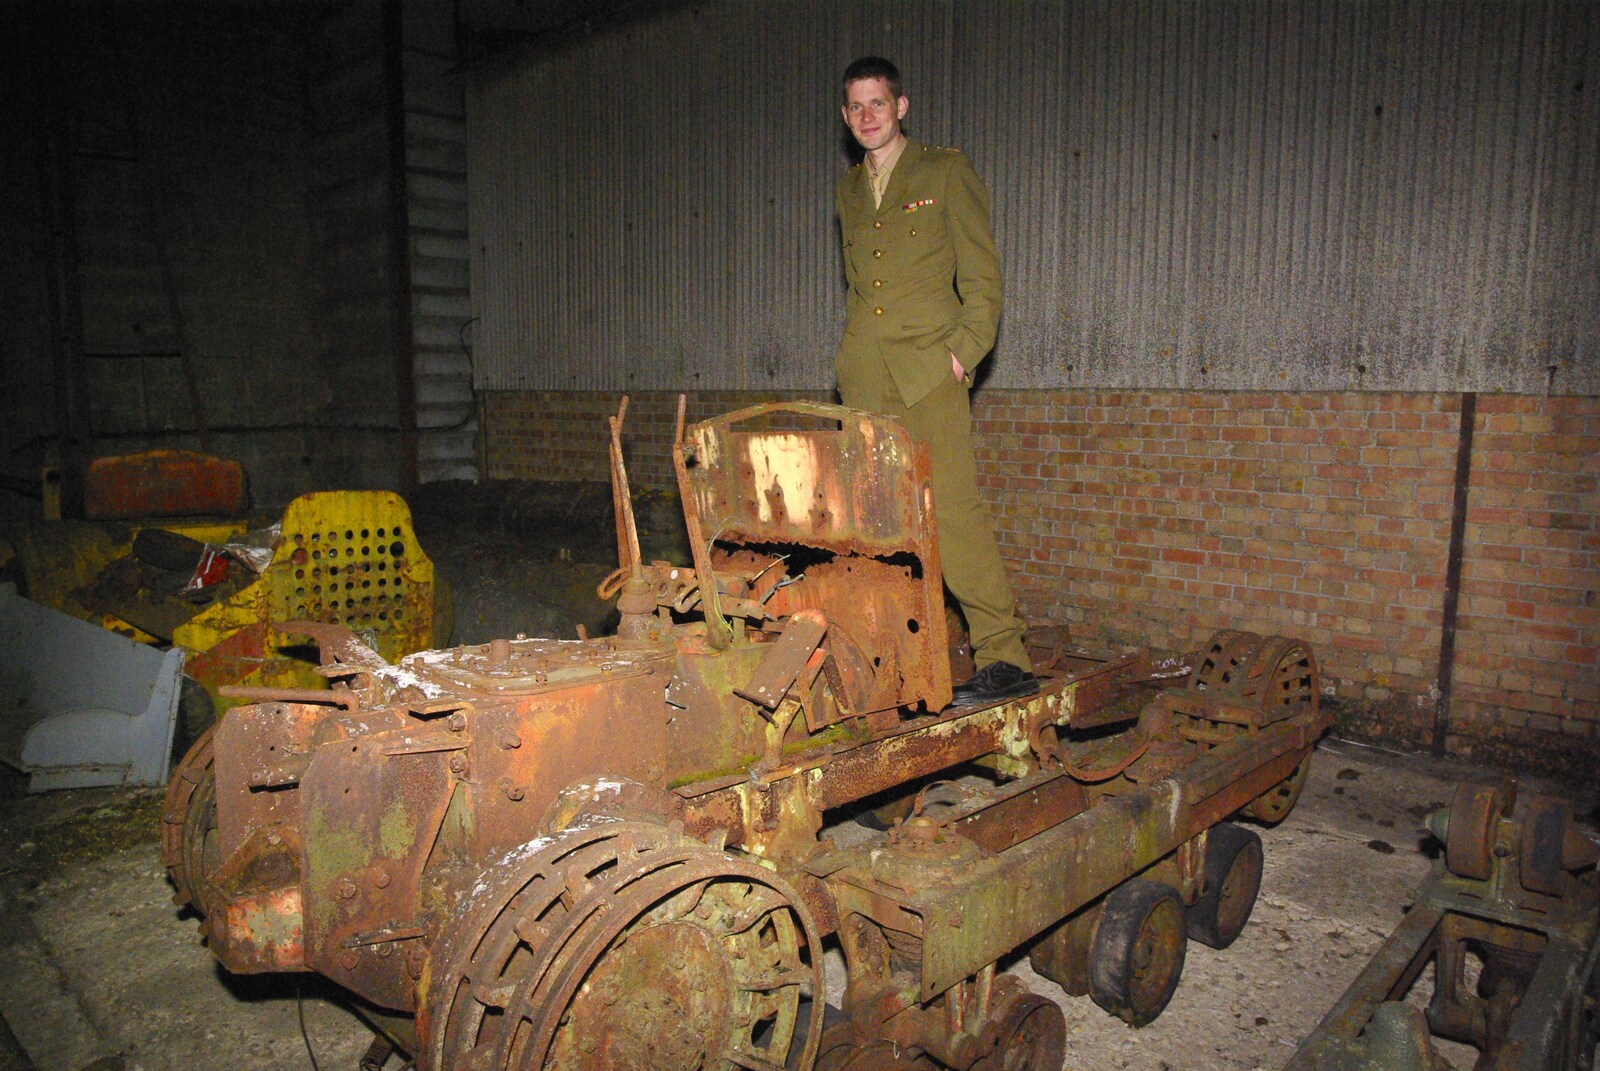 The Boy Phil stands on the remains of a tank from The Debach Airfield 1940s Dance, Debach, Suffolk - 6th June 2009